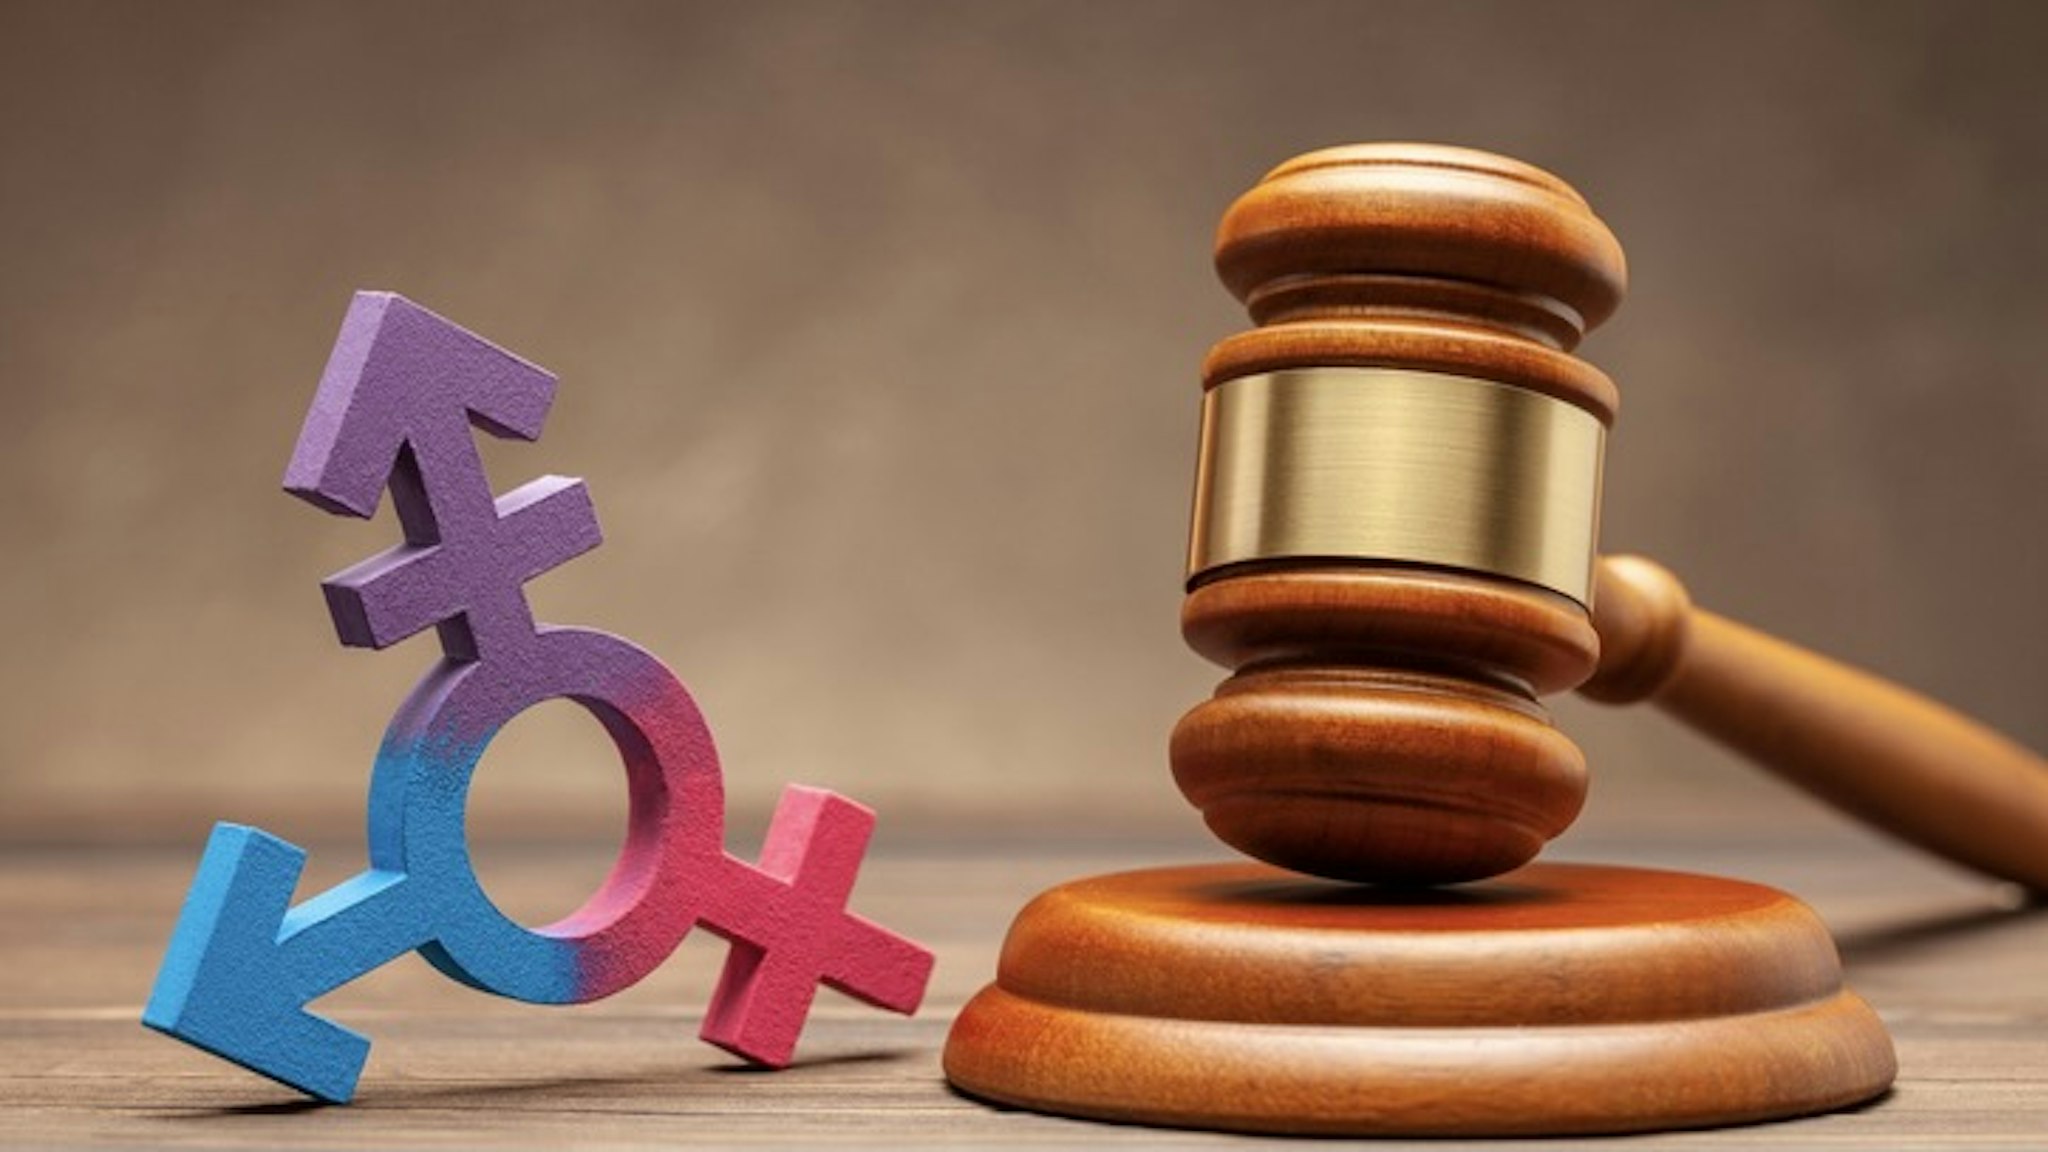 Transgender symbol and judge gavel on brown background. Concept of prohibition or permission for parade or marriage - stock photo Transgender symbol and judge gavel on brown background. Concept of prohibition or permission for parade or marriage.